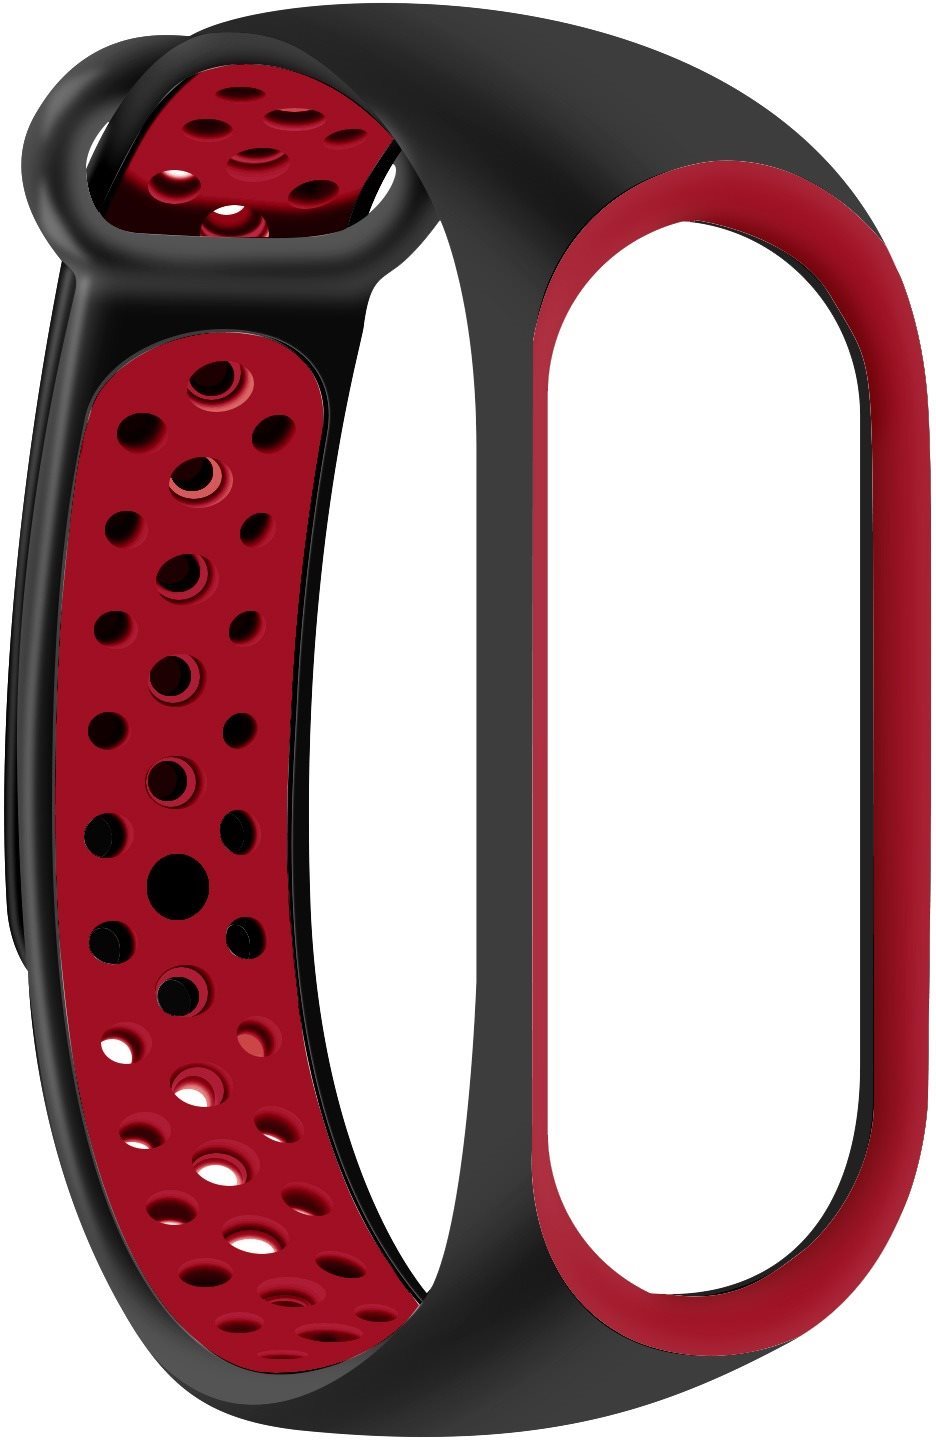 Eternico Sporty Xiaomi Mi band 5 / 6 / 7 - solid black and red